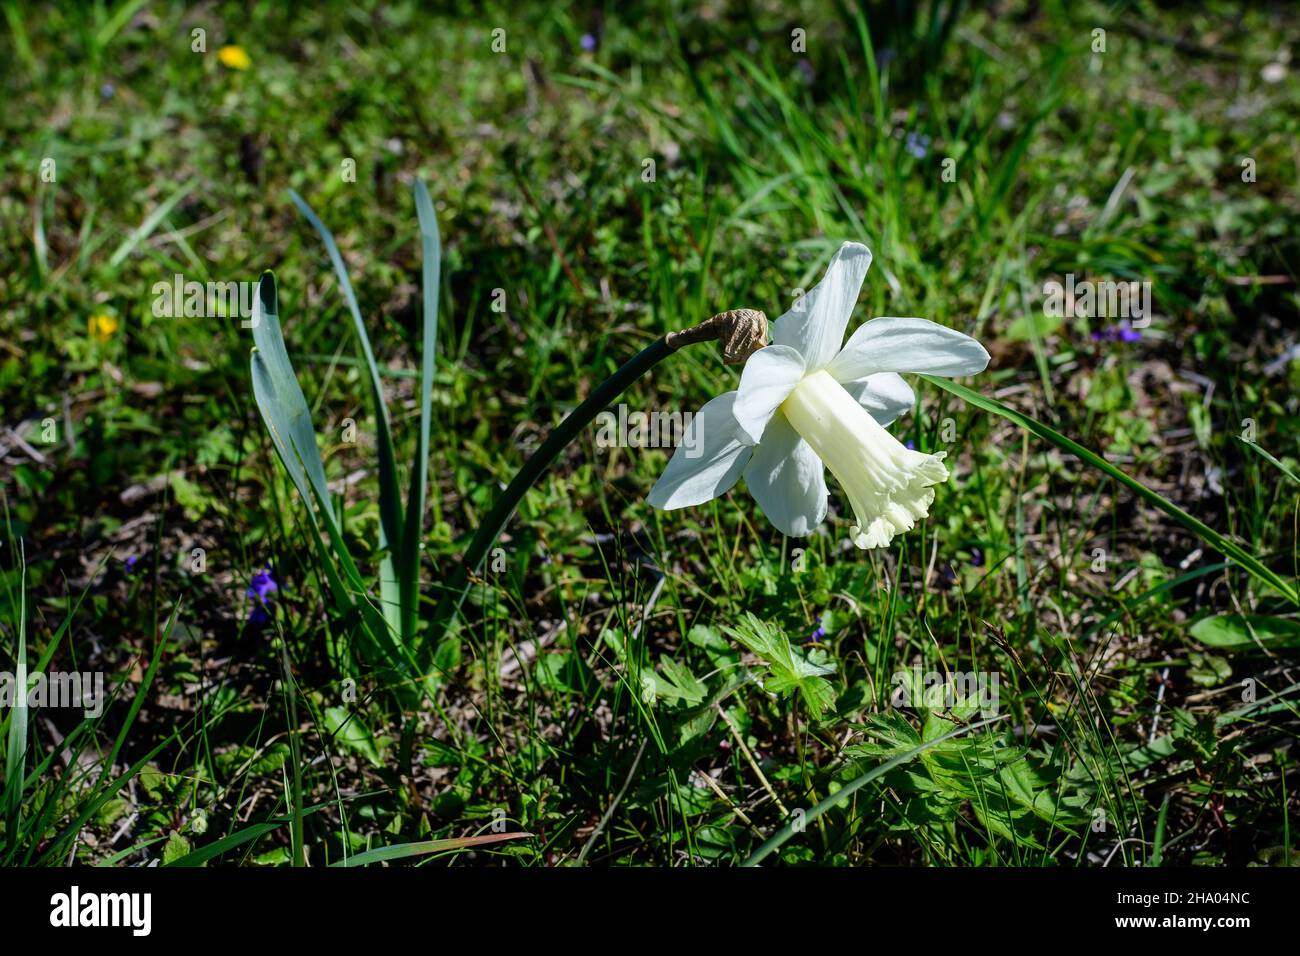 One delicate white and vidid yellow daffodil flower in full bloom with blurred green grass, in a sunny spring garden, beautiful outdoor floral backgro Stock Photo